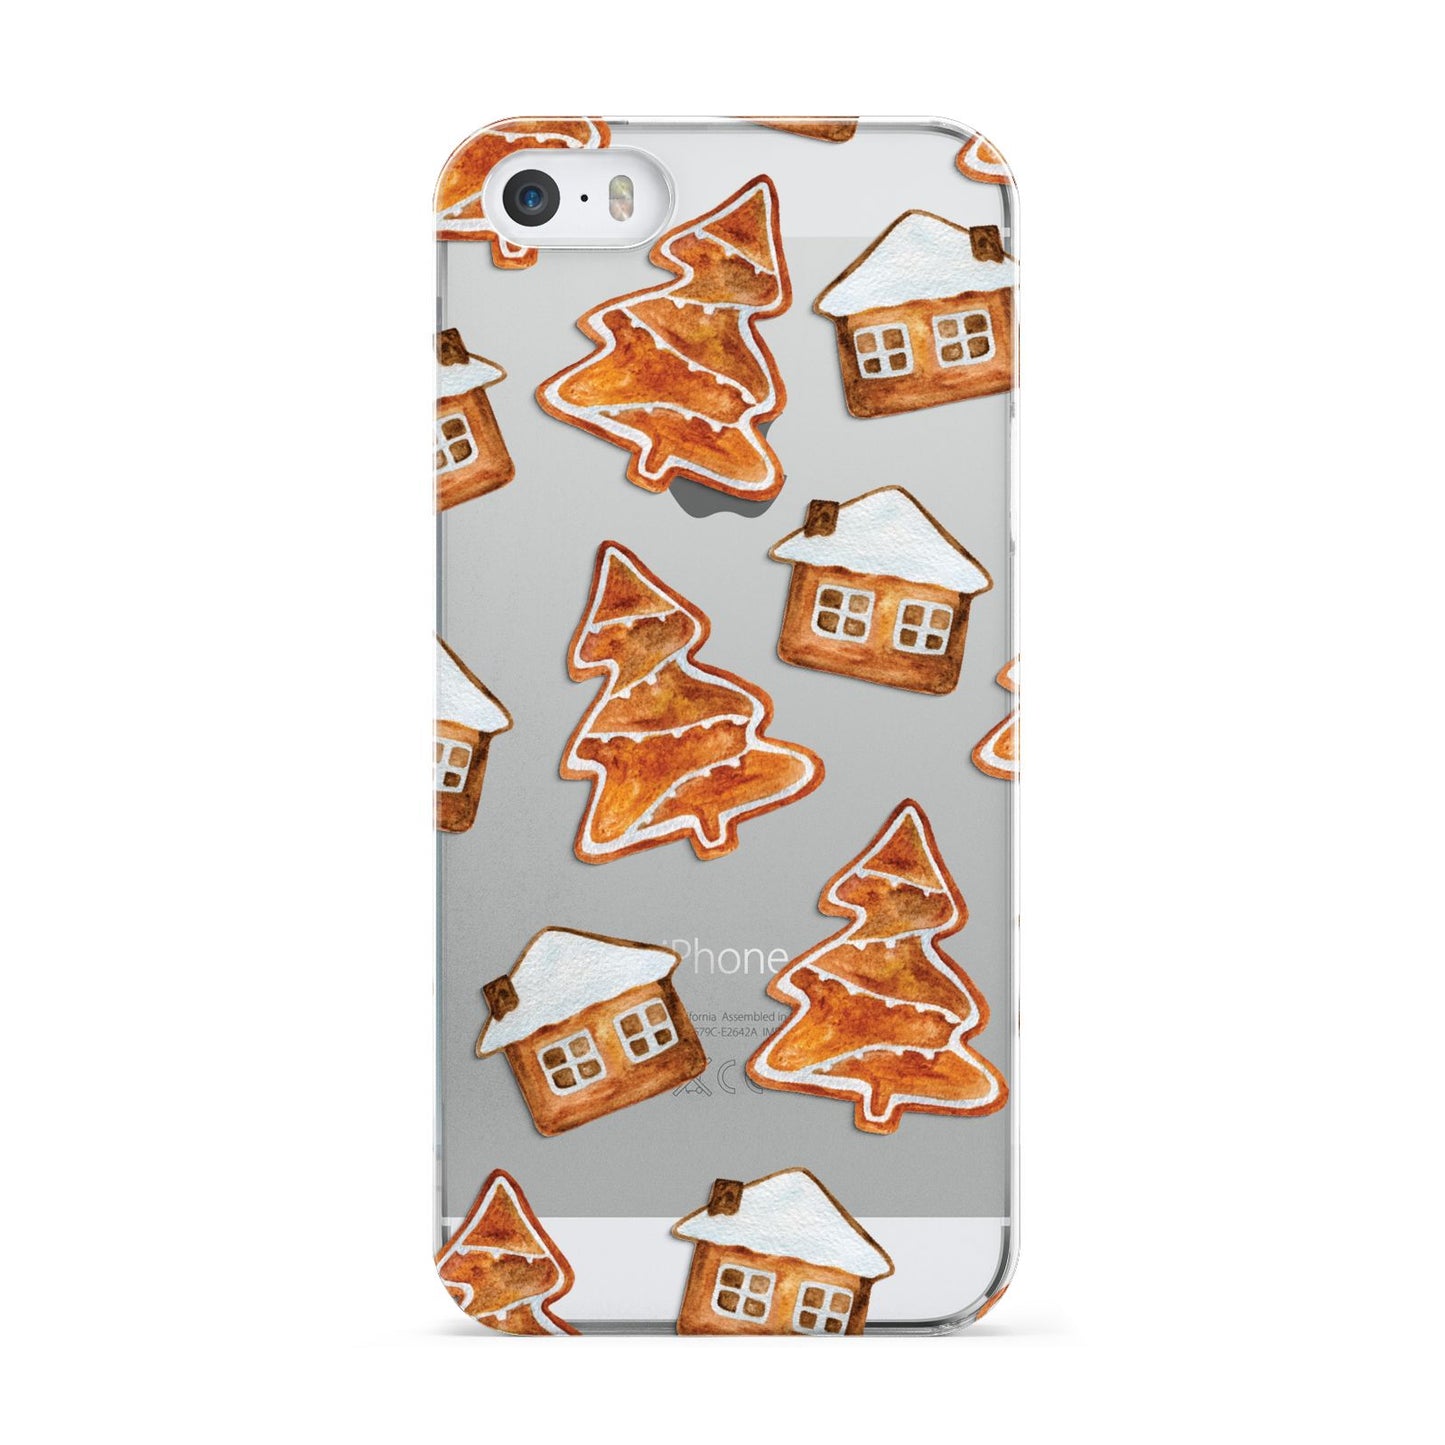 Gingerbread House Tree Apple iPhone 5 Case